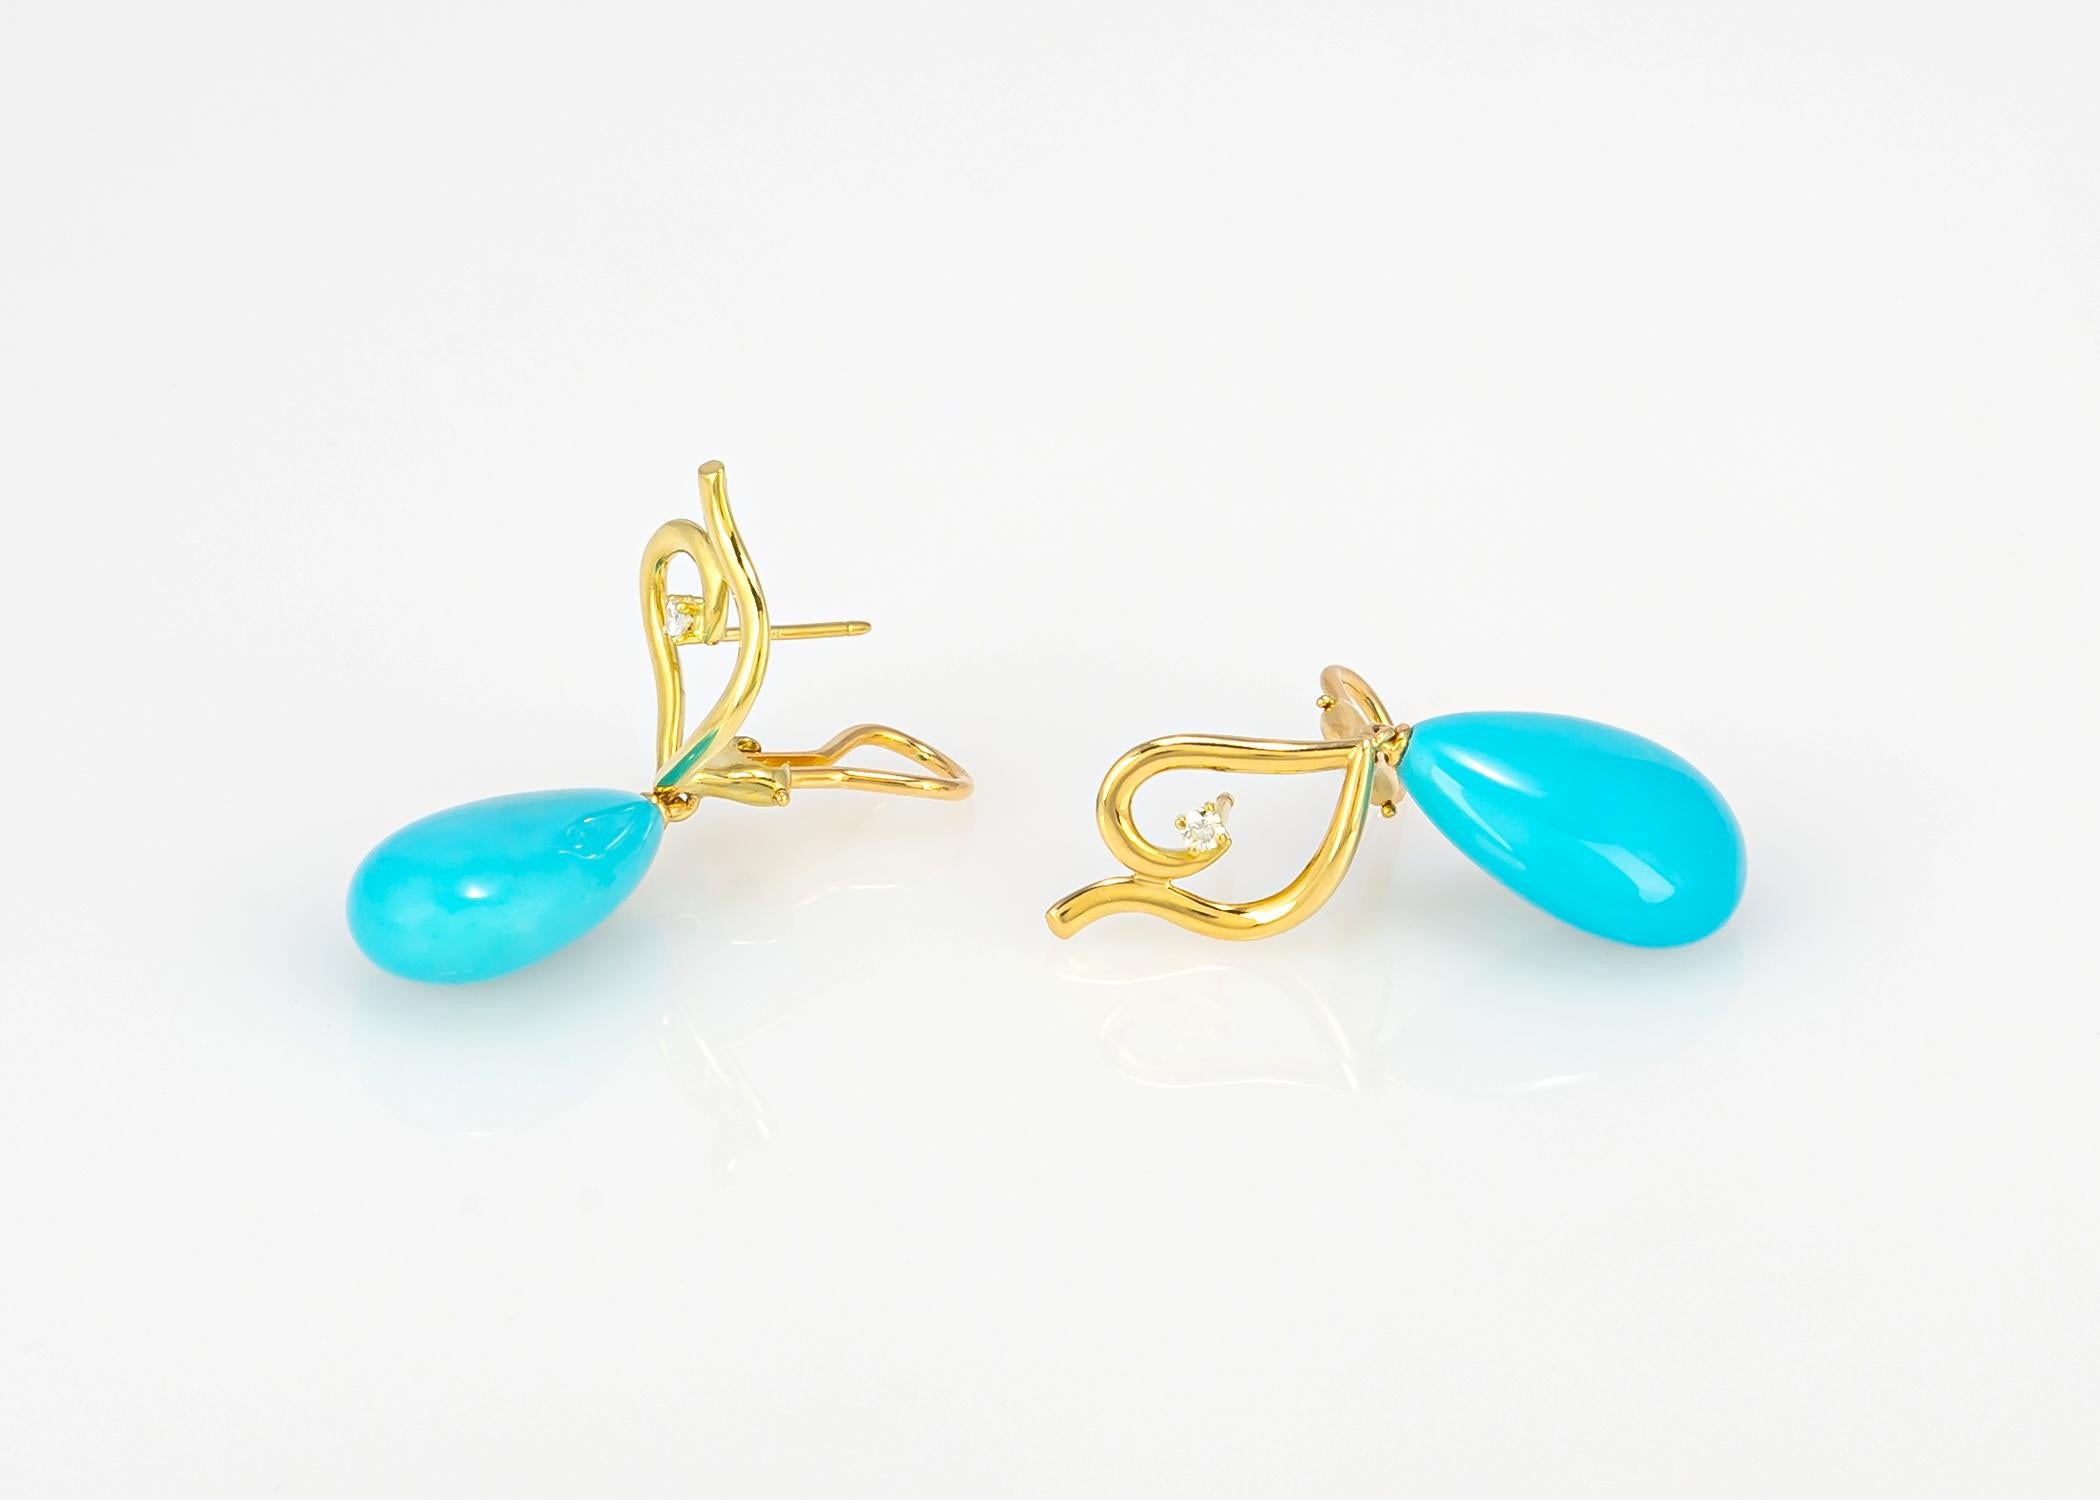 Tiffany & co, is famous for their exceptional designs and quality. This pair of earrings certainly show that often less is more. The simple leaf motif top finished with a brilliant cut diamond is perfect to showcase beautiful turquoise drops. At 1